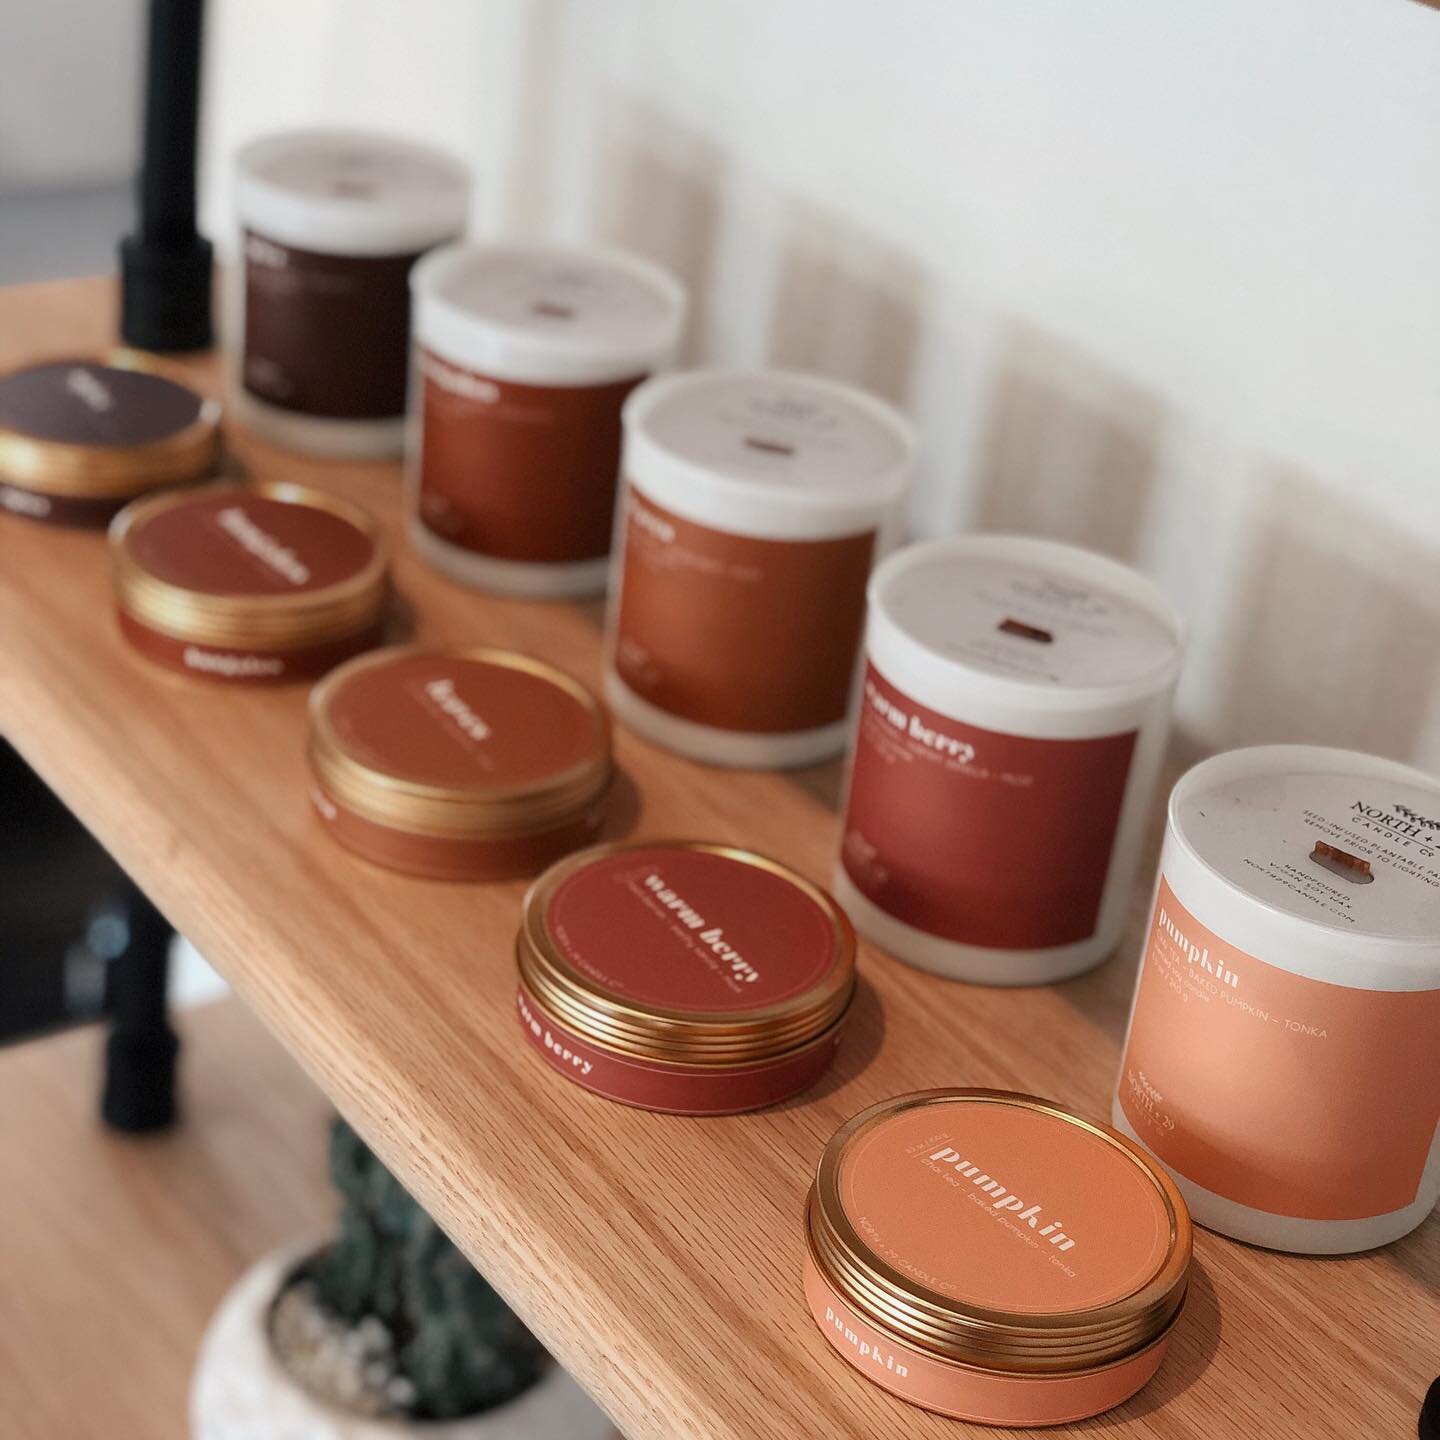 I am so excited to introduce you babes to North + 29 Candle Co. This Woman owned company donates a portion of their profits to prevent deforestation in impoverished areas around the world. Not only do these candles smell heavenly and look incredibly 